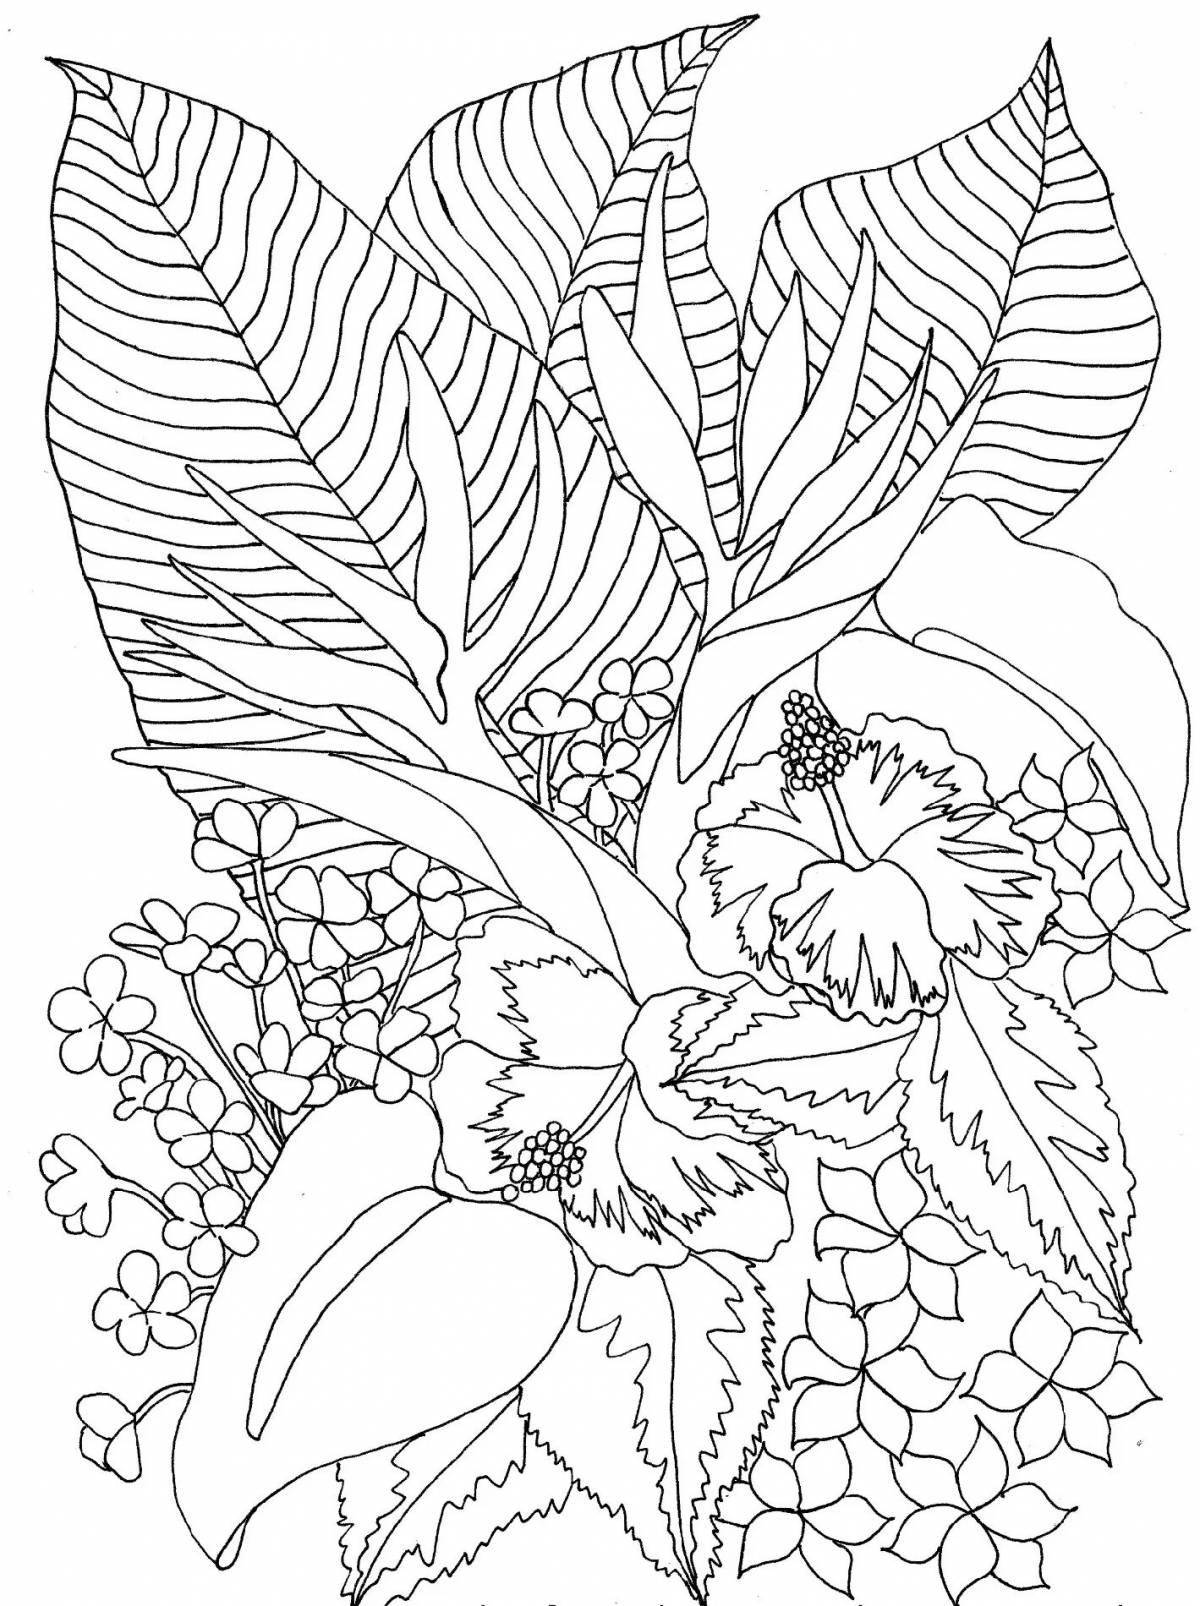 Composition coloring page color-frenzy